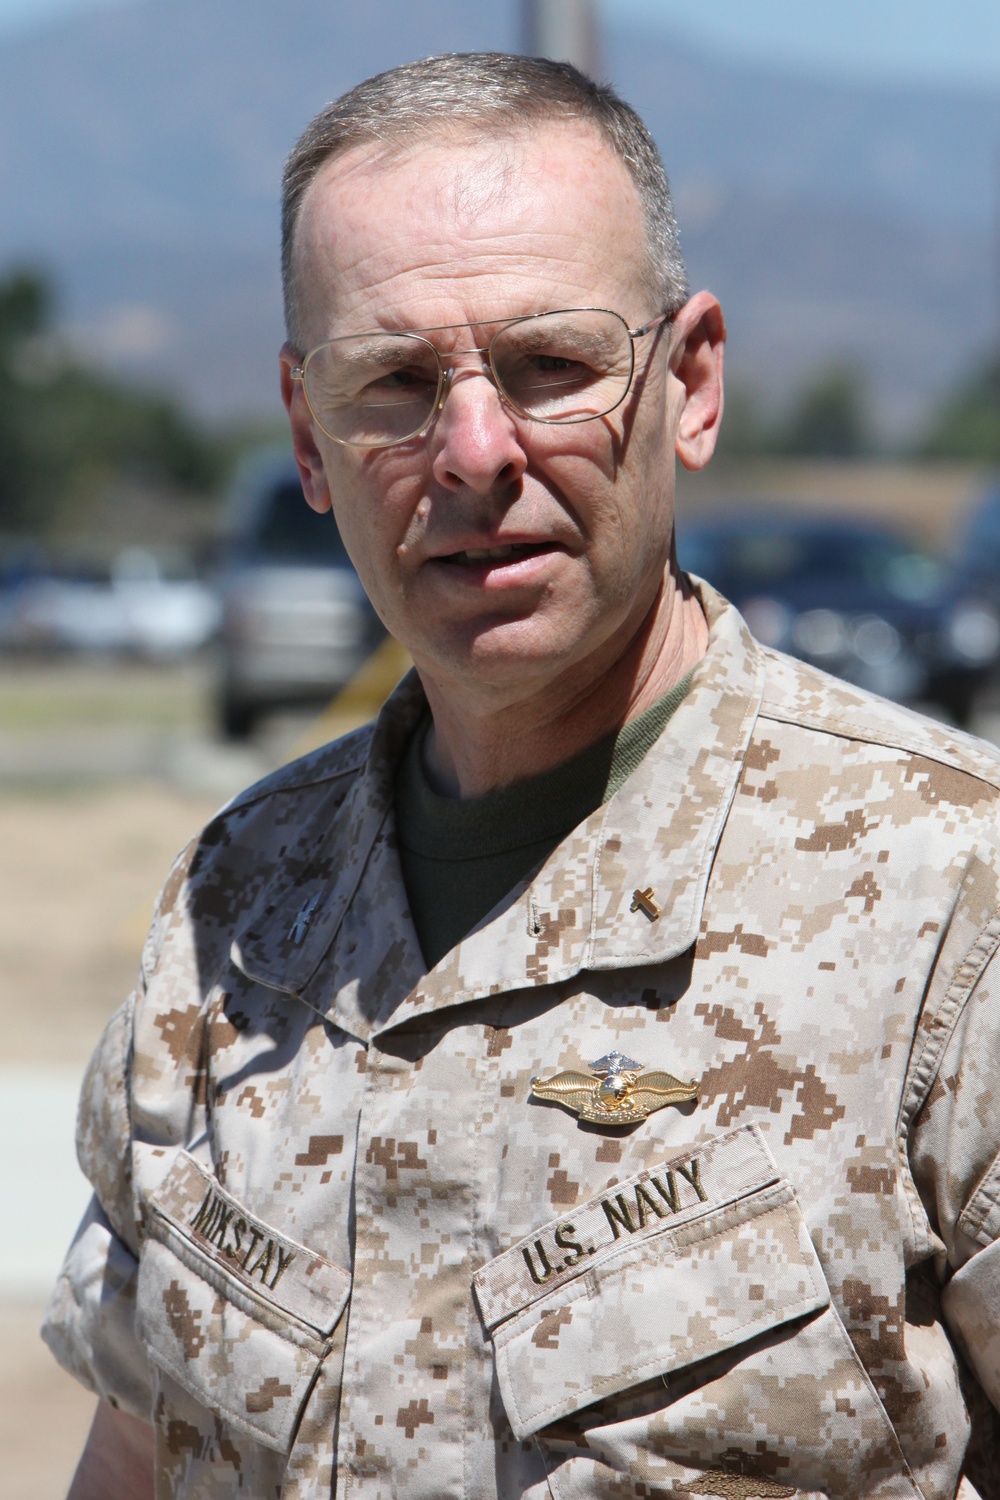 Answering the call: Chaplain serves alongside brothers in arms